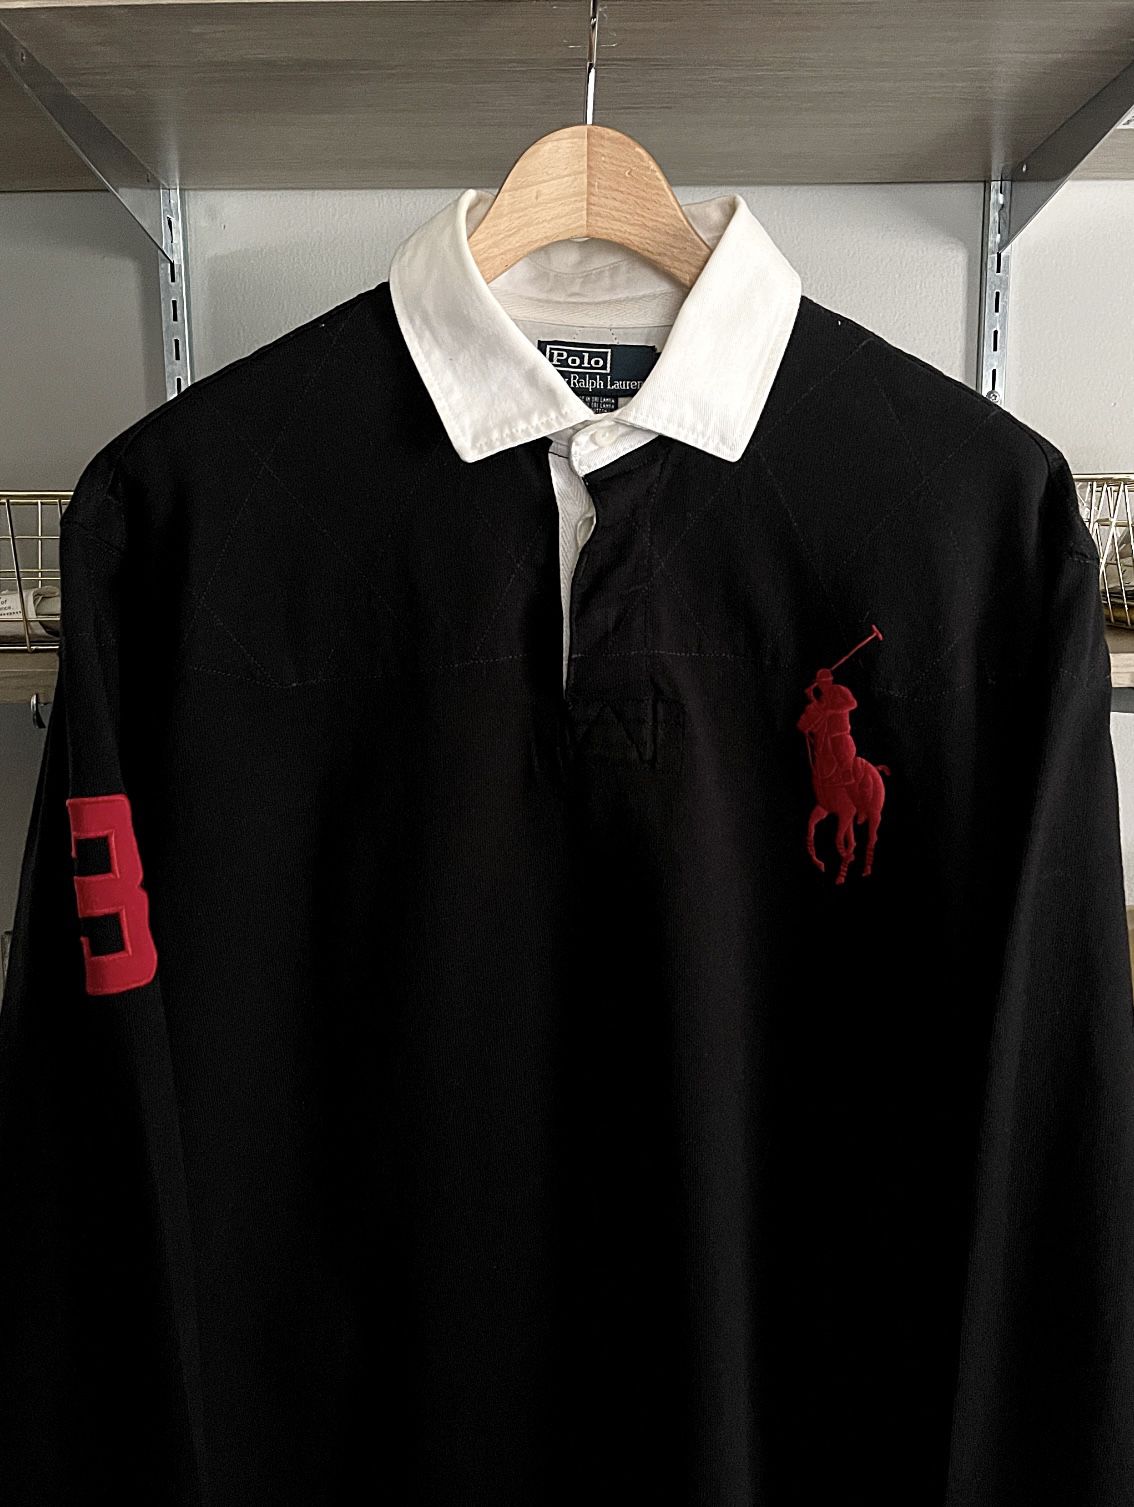 Mens Polo Ralph Lauren Rugby Shirt size L retail $198 Regular fit. Lightweight classic rugby soft cotton fleece and updated woven collar. Color black,